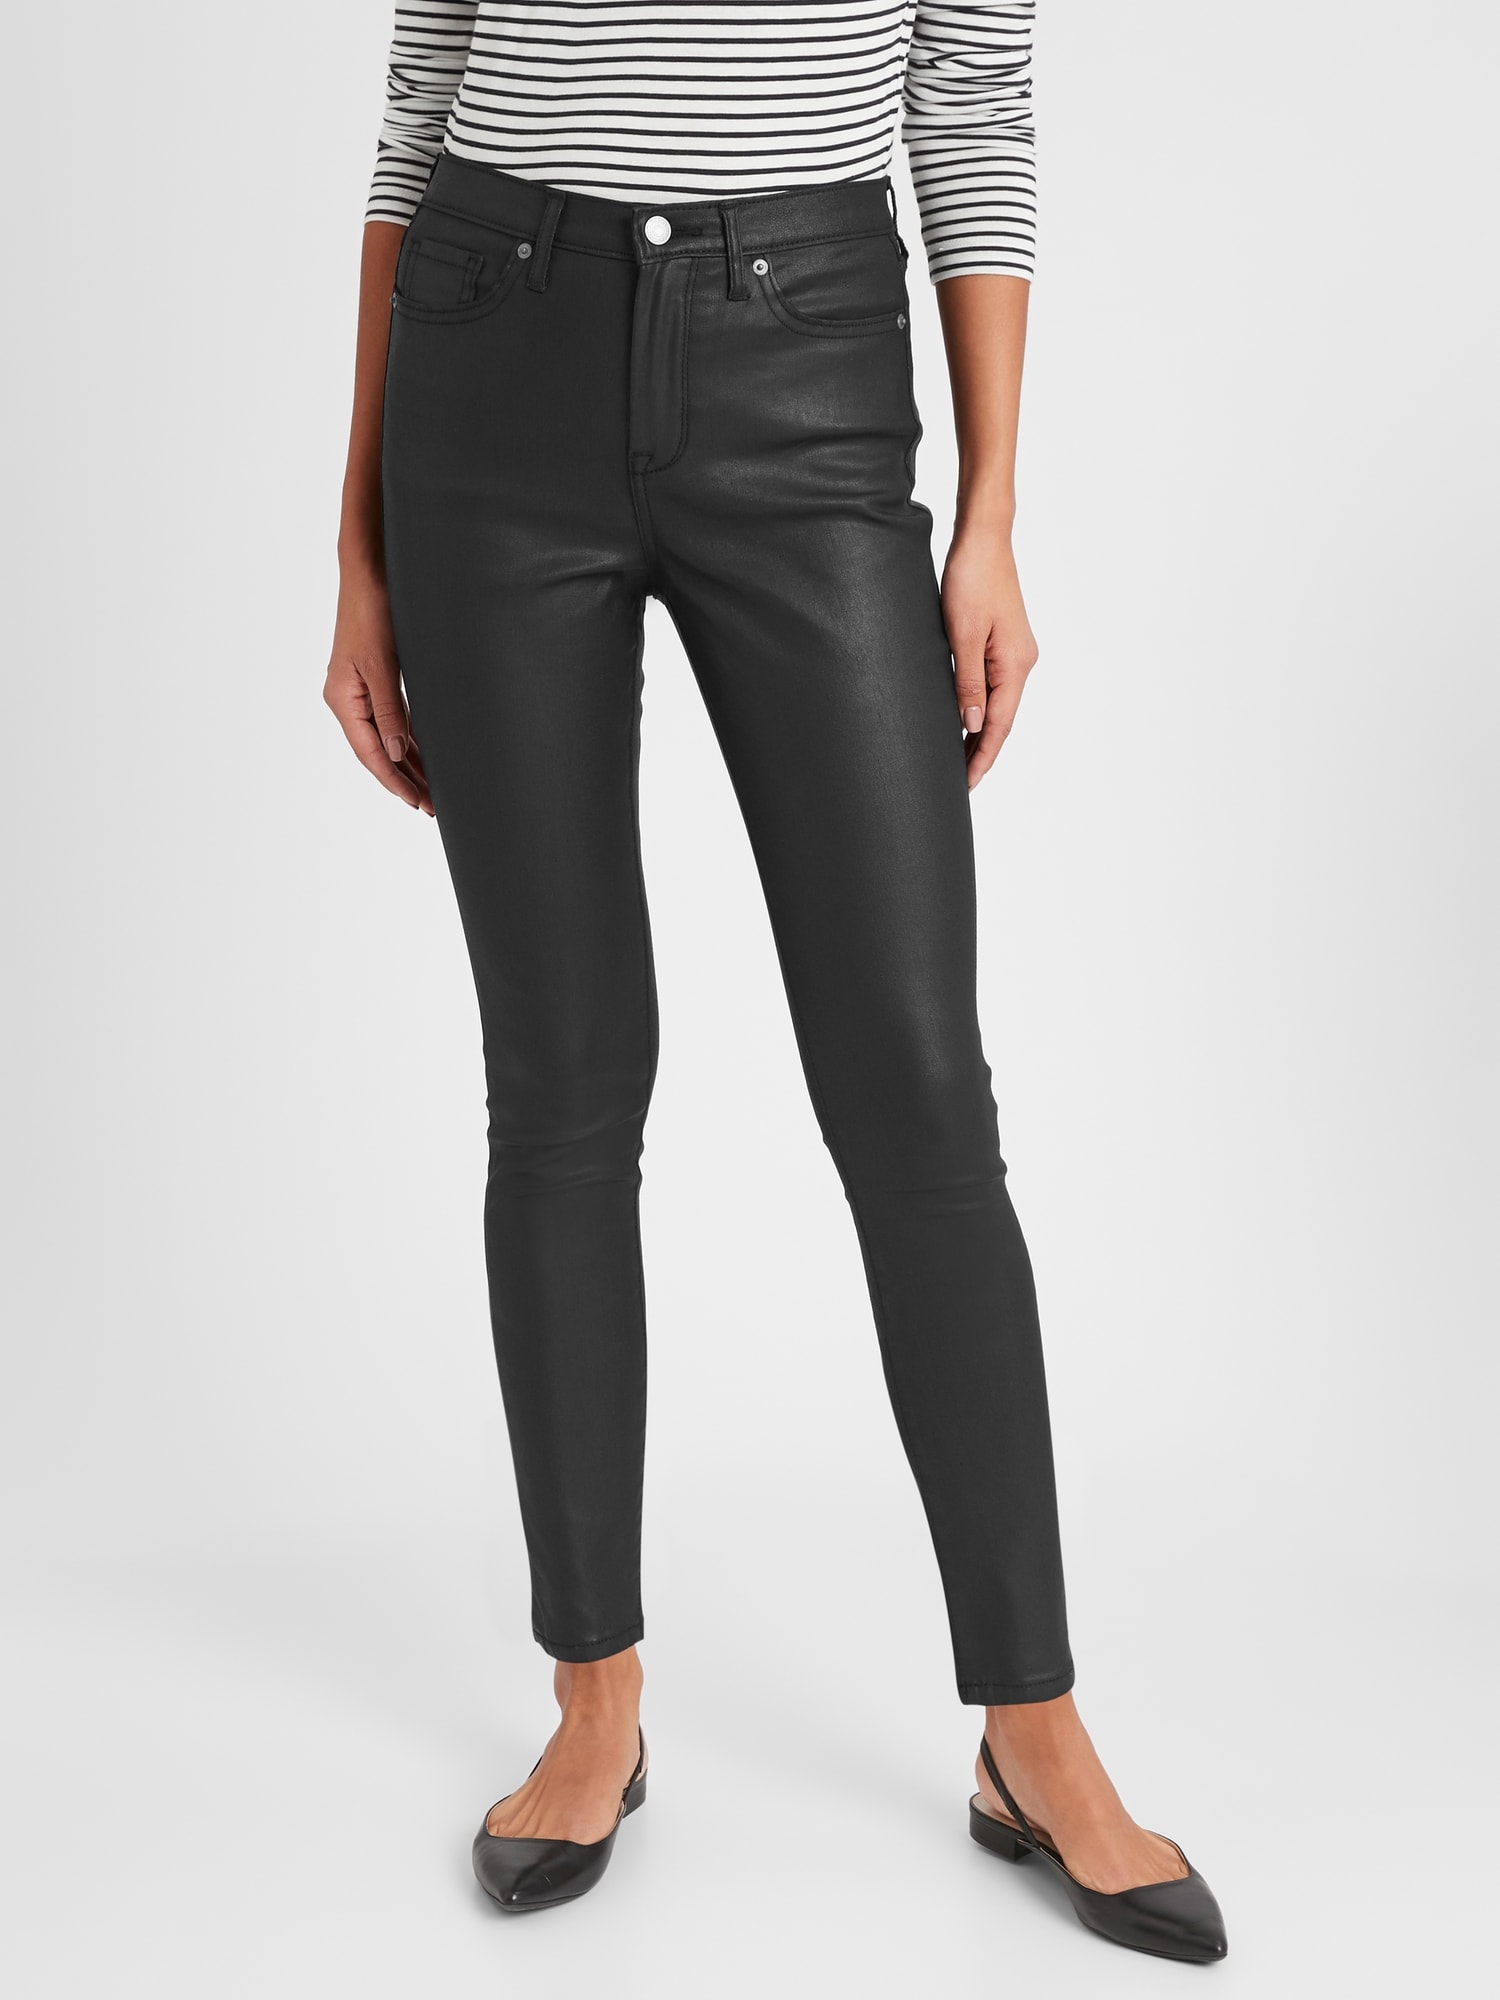 coated black jeans